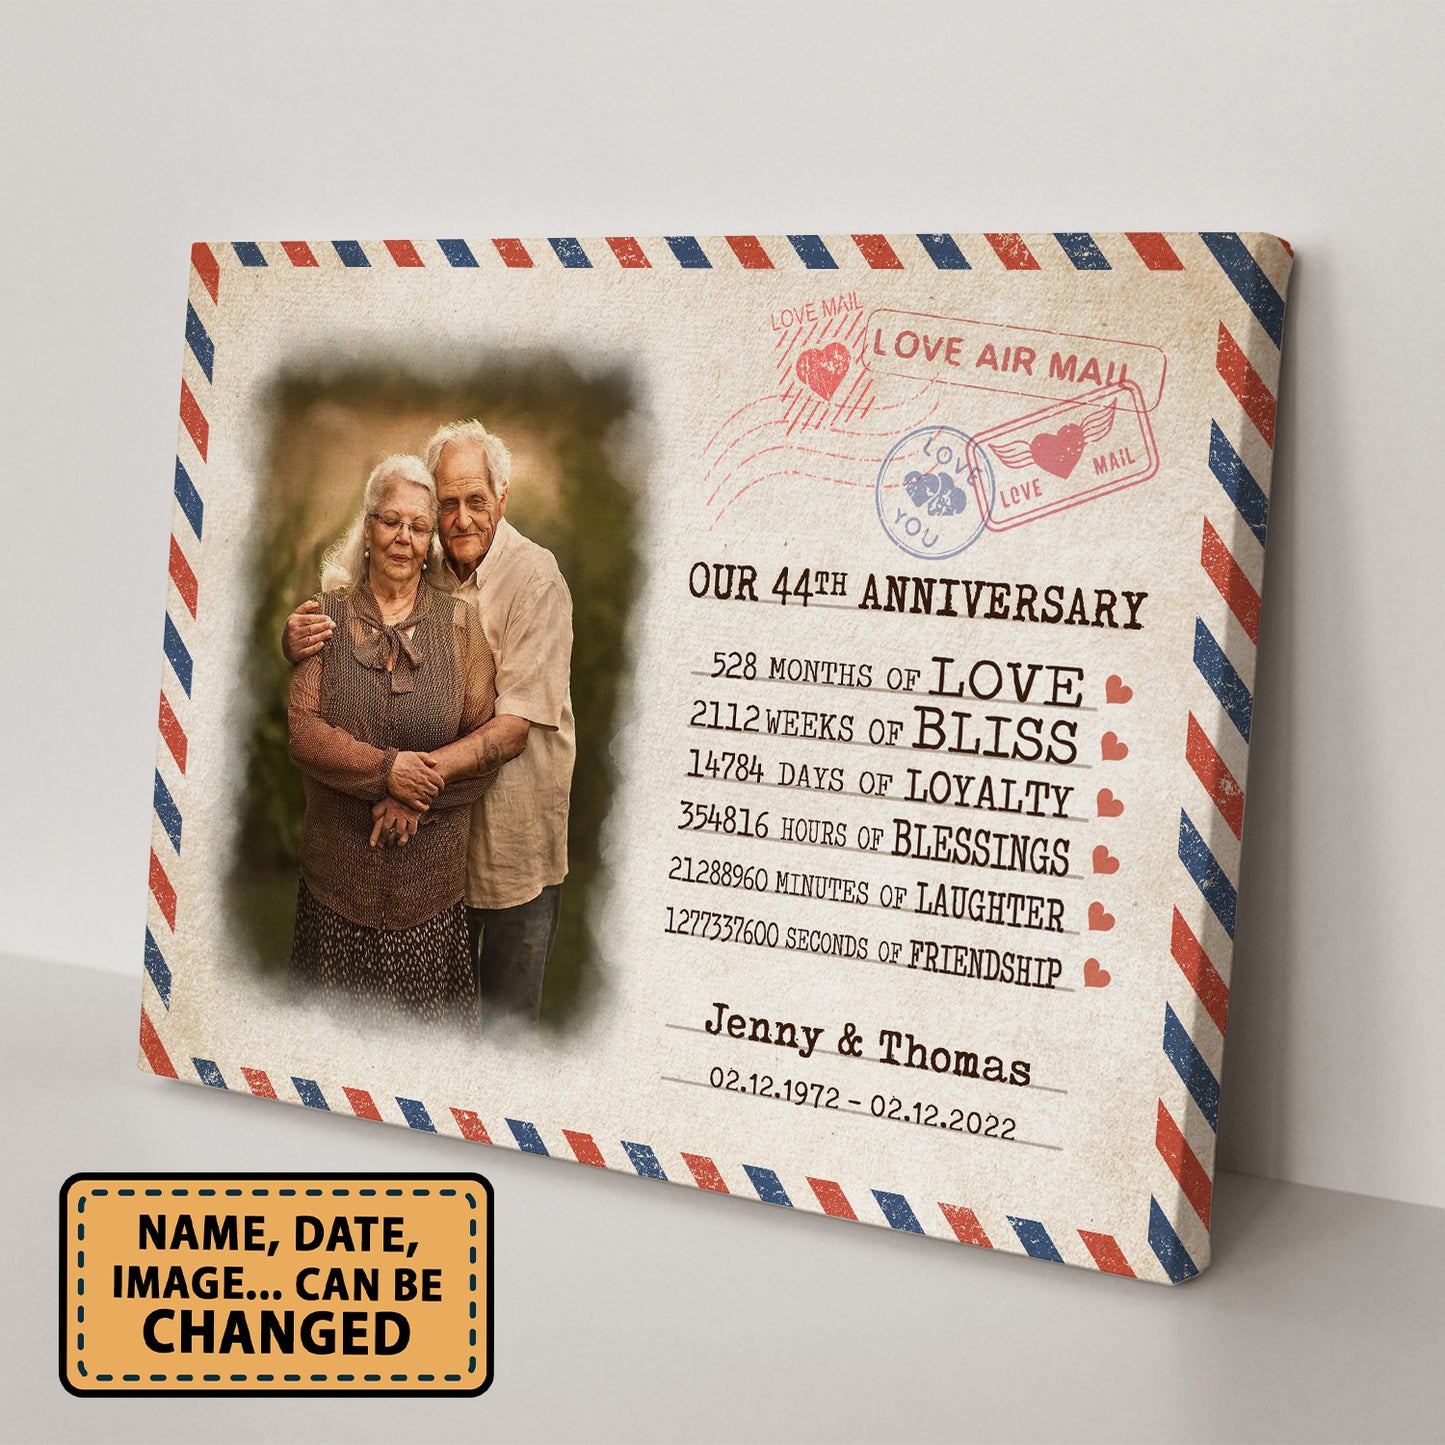 Our 44th Anniversary Letter Valentine Gift Personalized Canvas